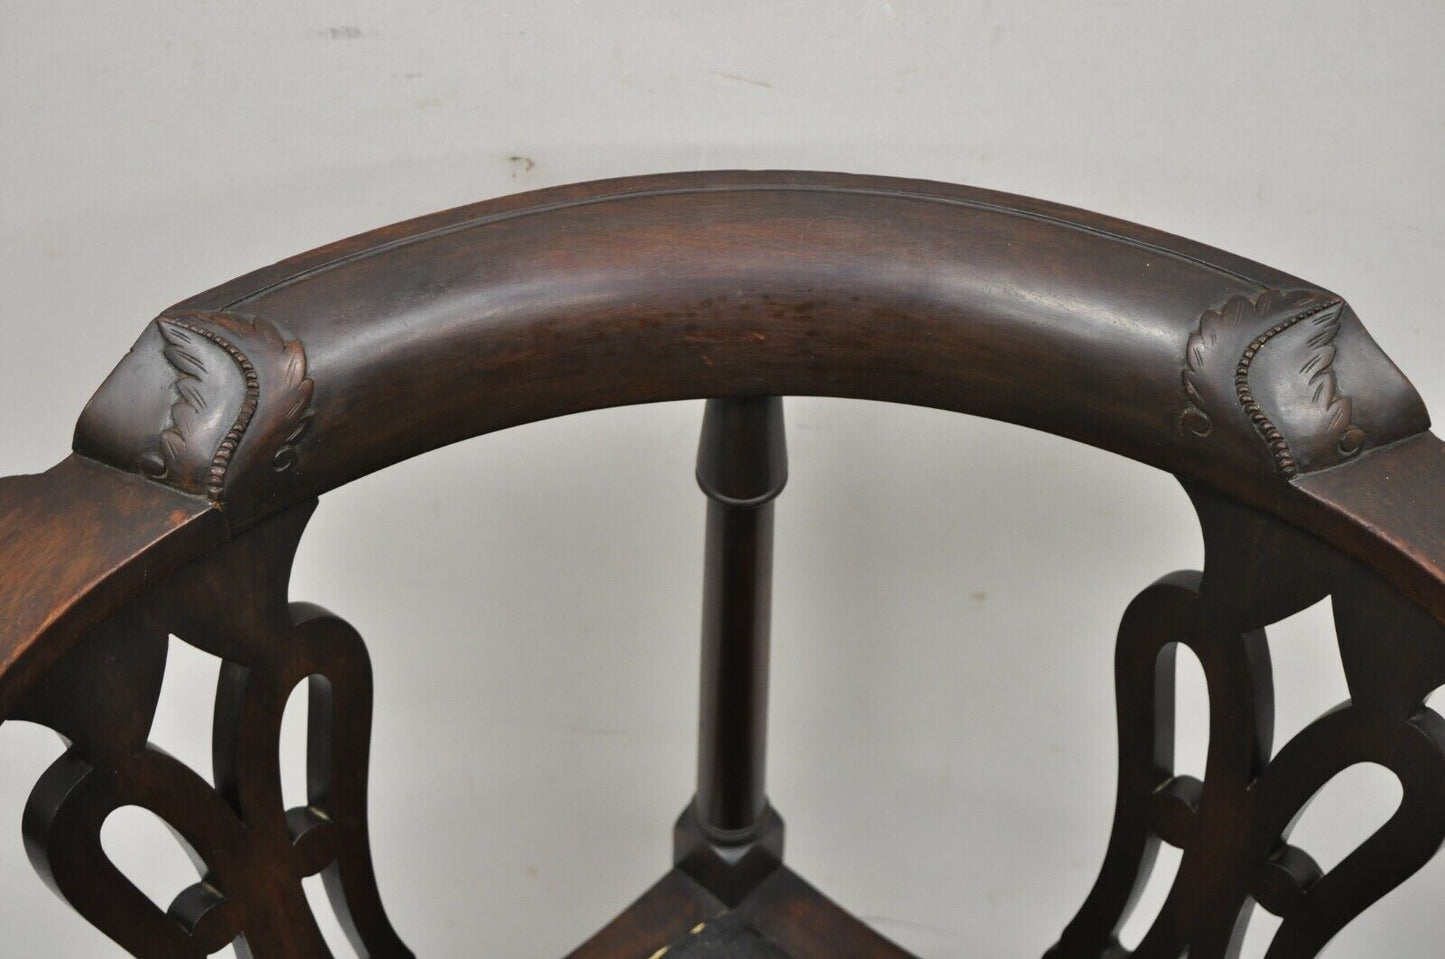 Antique English Chippendale Georgian Style Mahogany Ball and Claw Corner Chair